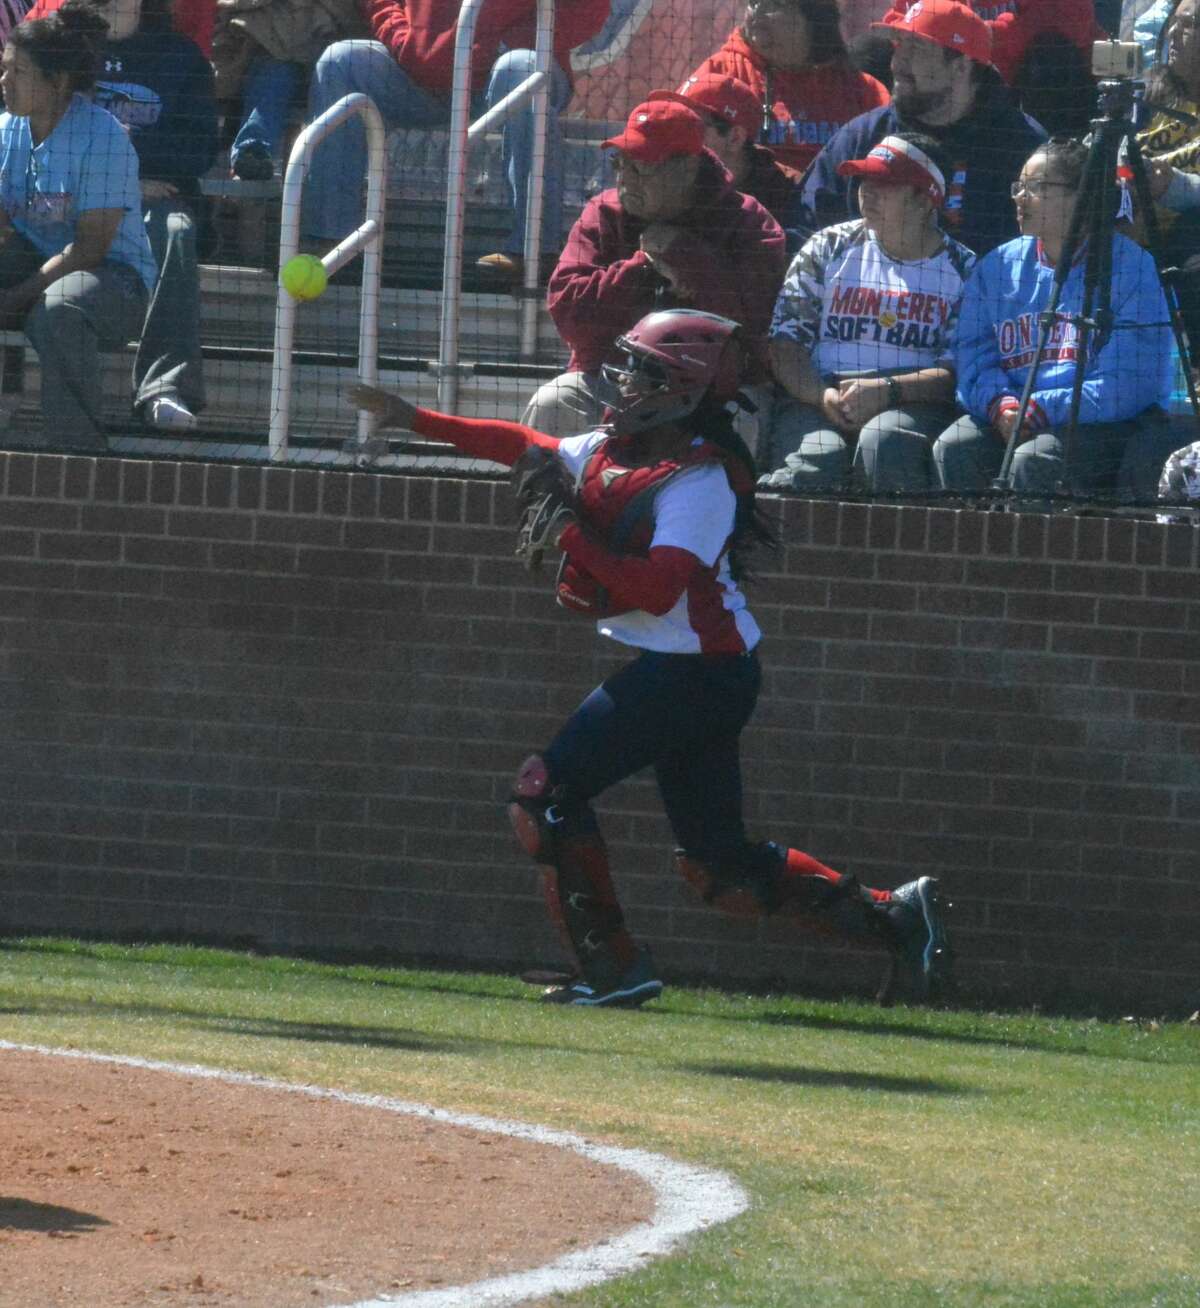 The Monterey Lady Plainsmen shut out the Plainview Lady Bulldogs, 5-0, during District 3-5A softball action on Friday in Plainview.